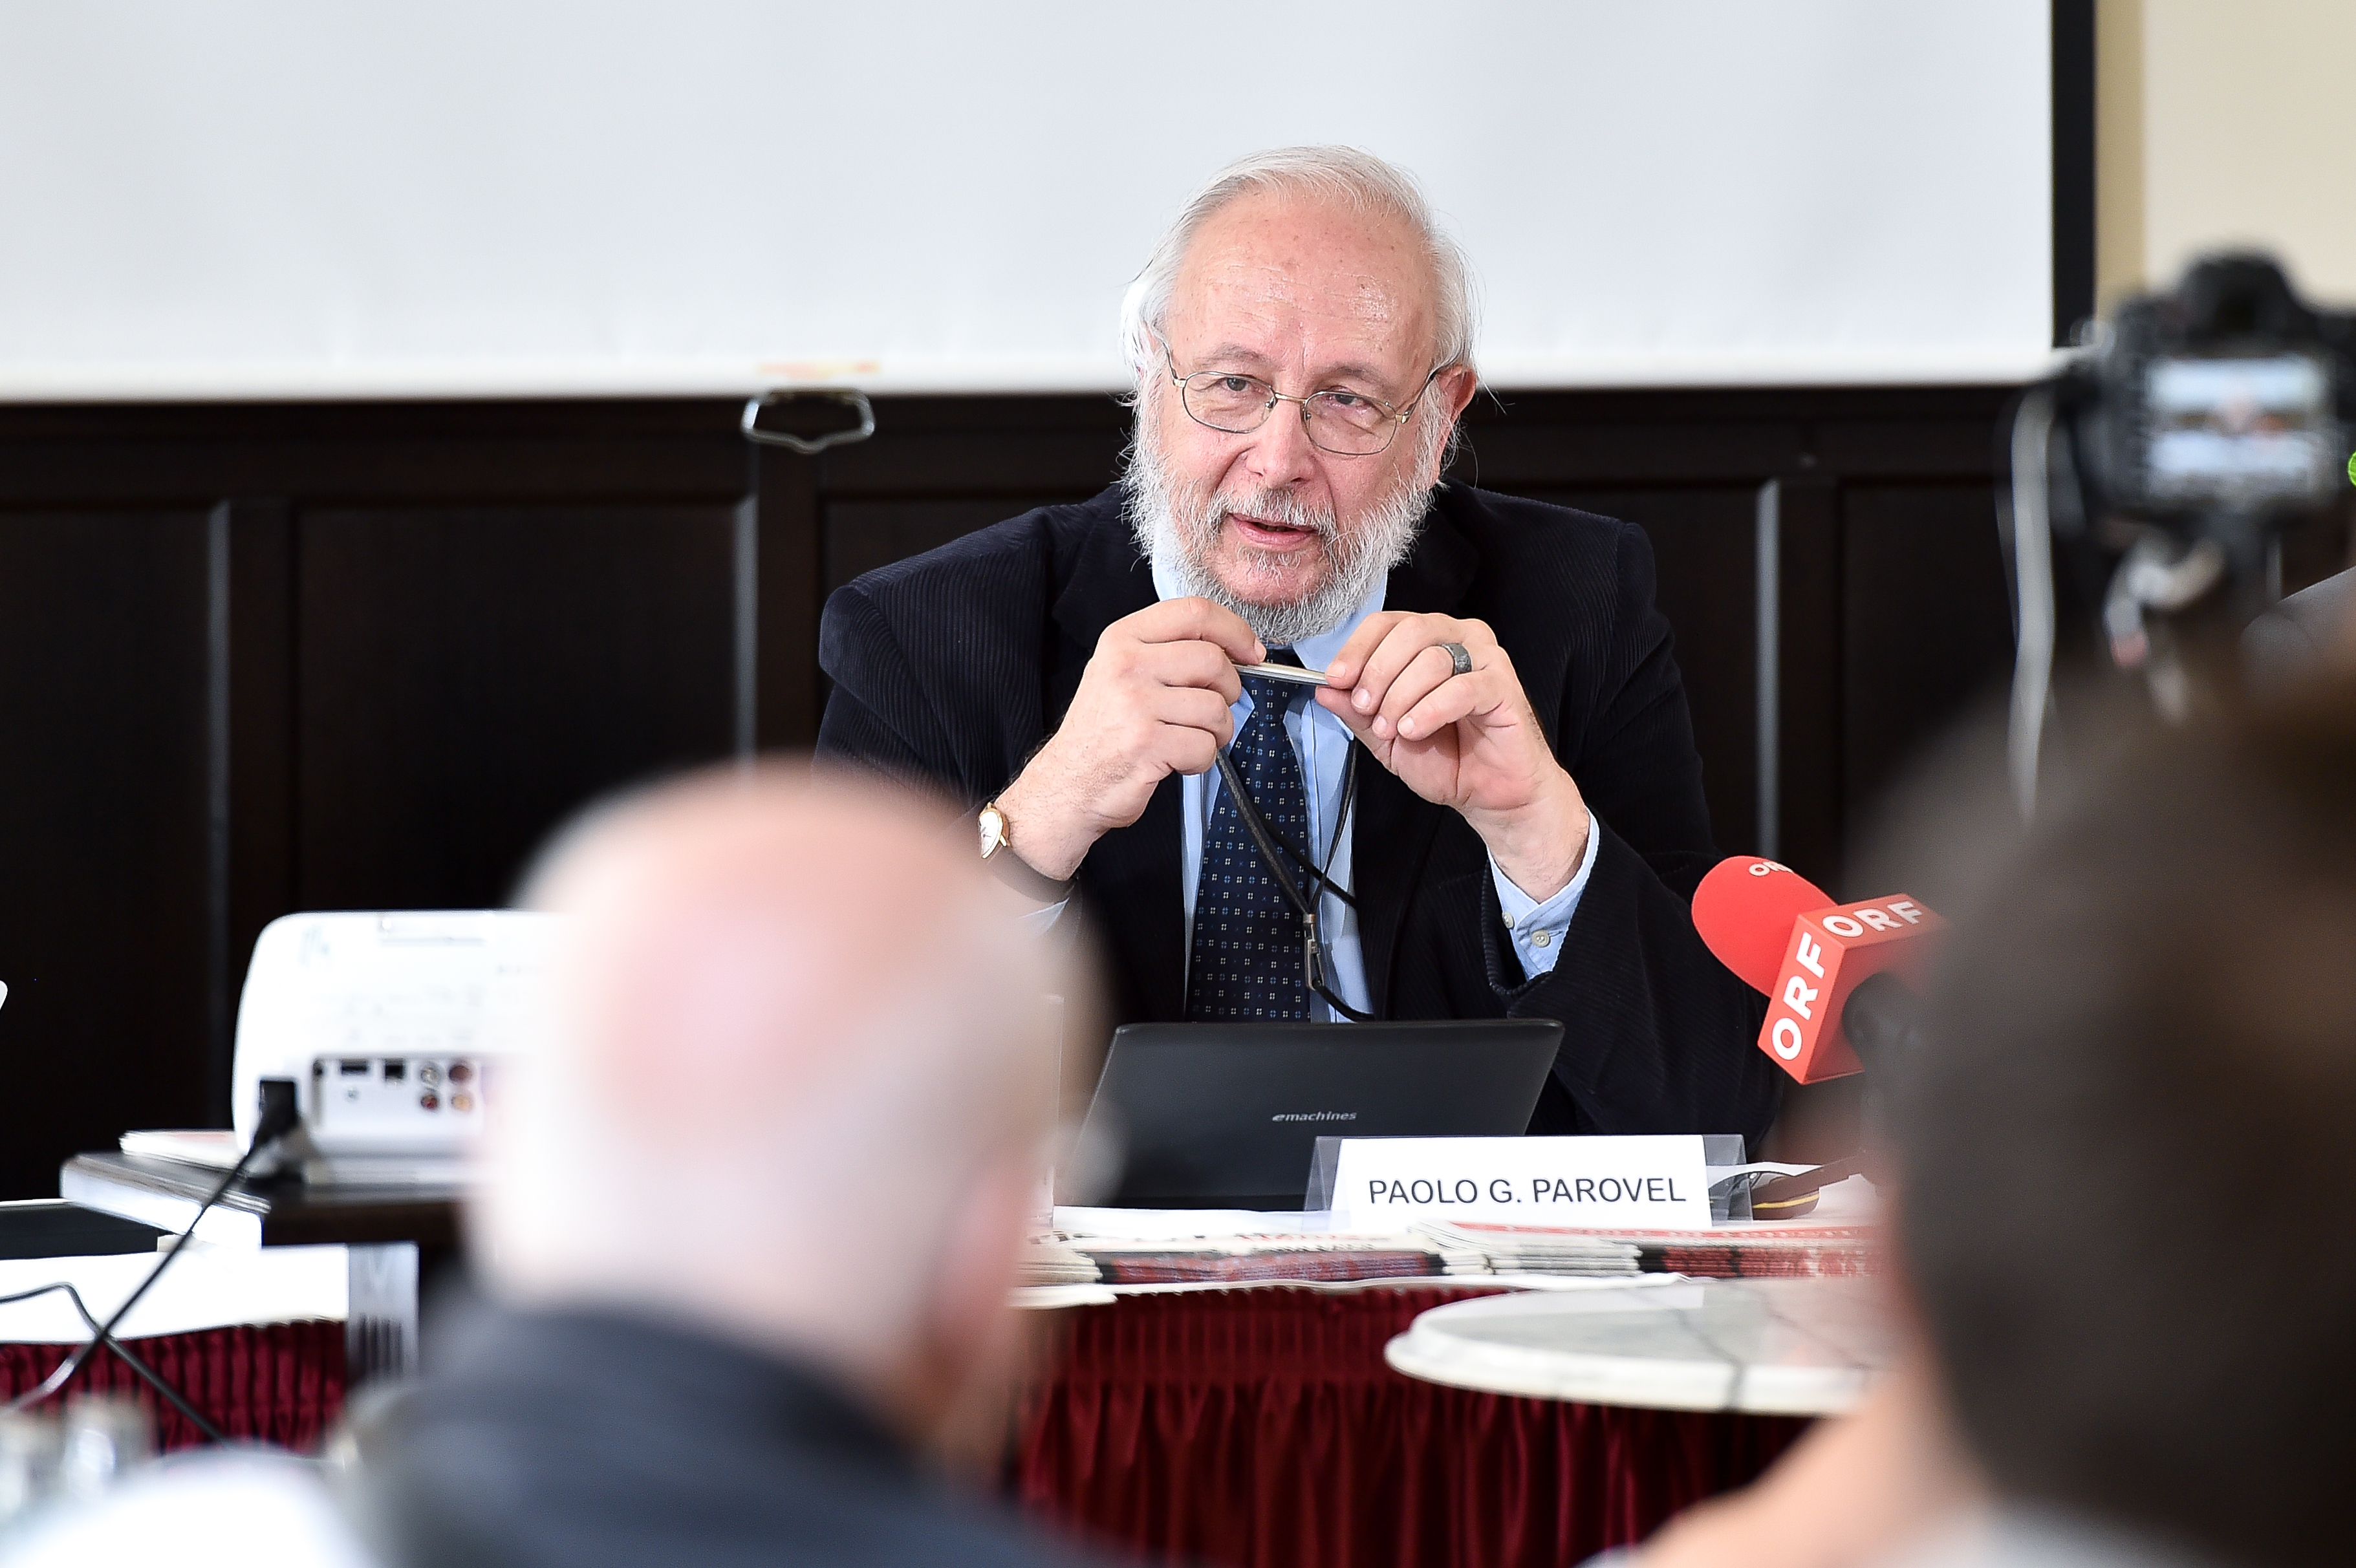 Free Trieste Movement – transcript of the press conference held in Vienna on September 9th, 2014